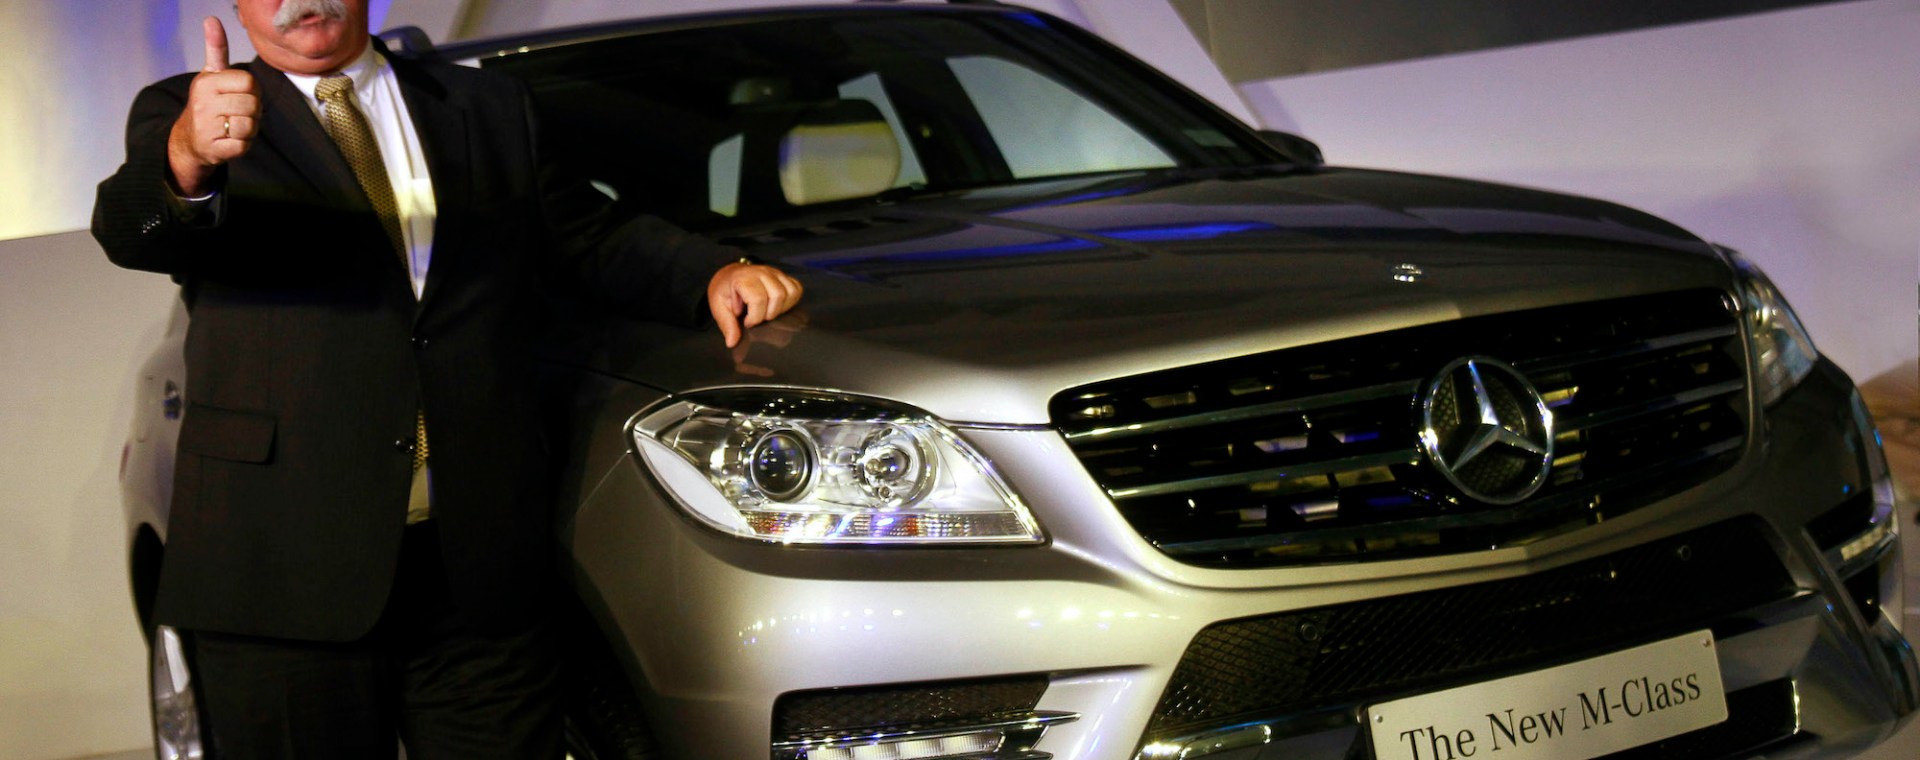 Managing Director & CEO at Mercedes-Benz India Peter Honegg announces the new Mercedes M-class SUV ML350